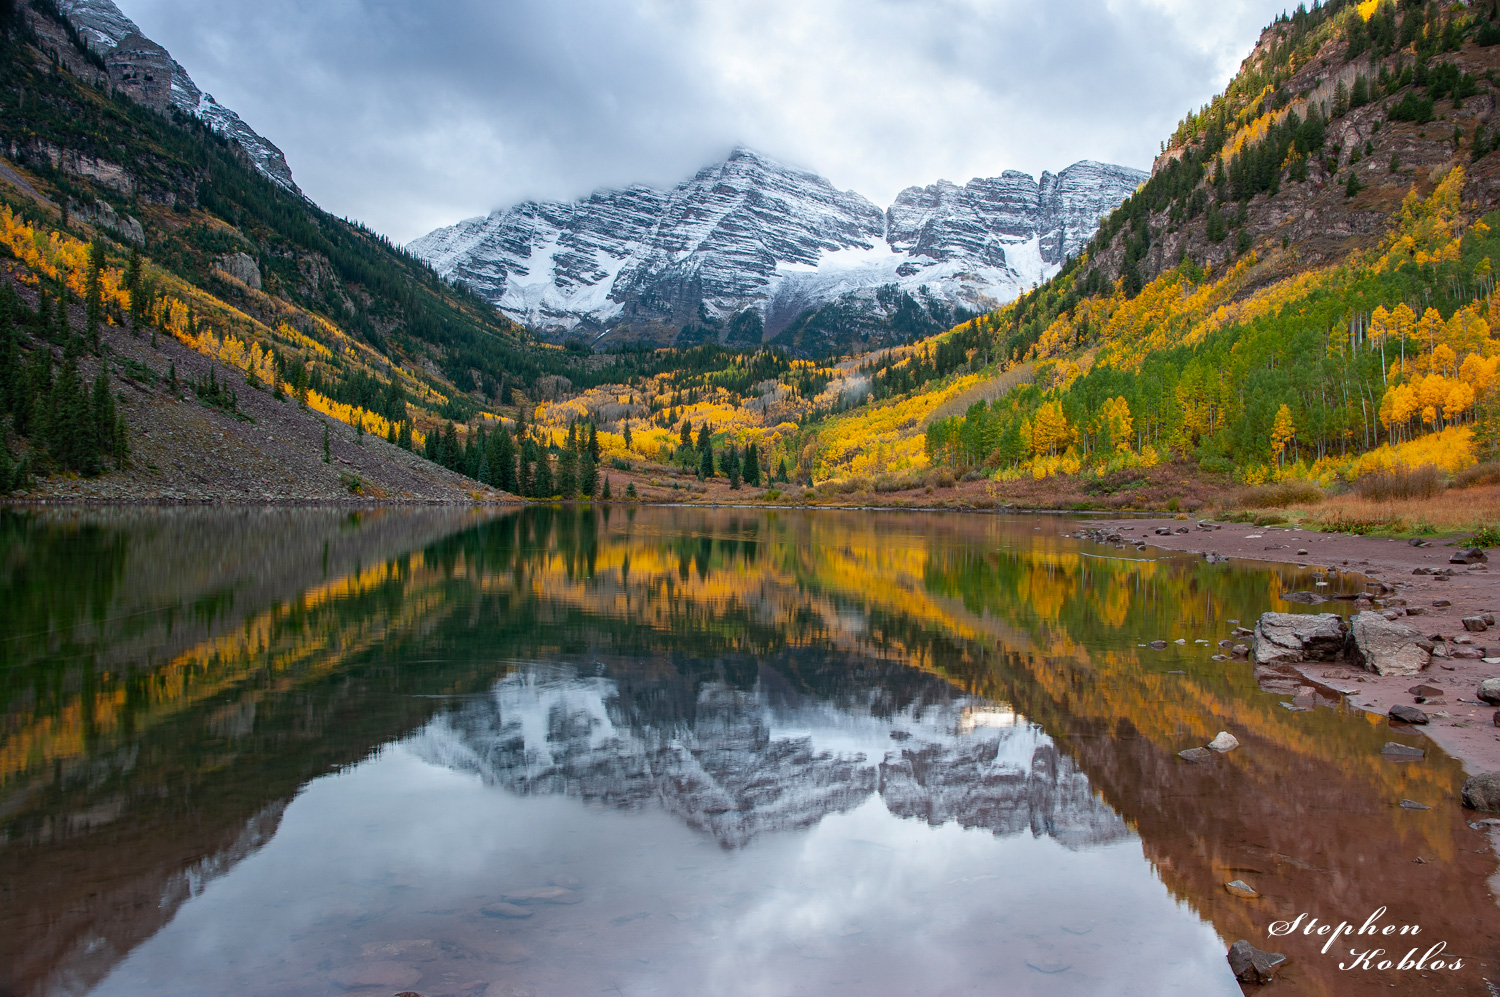 Maroon bells 2010' Limited Edition of 100